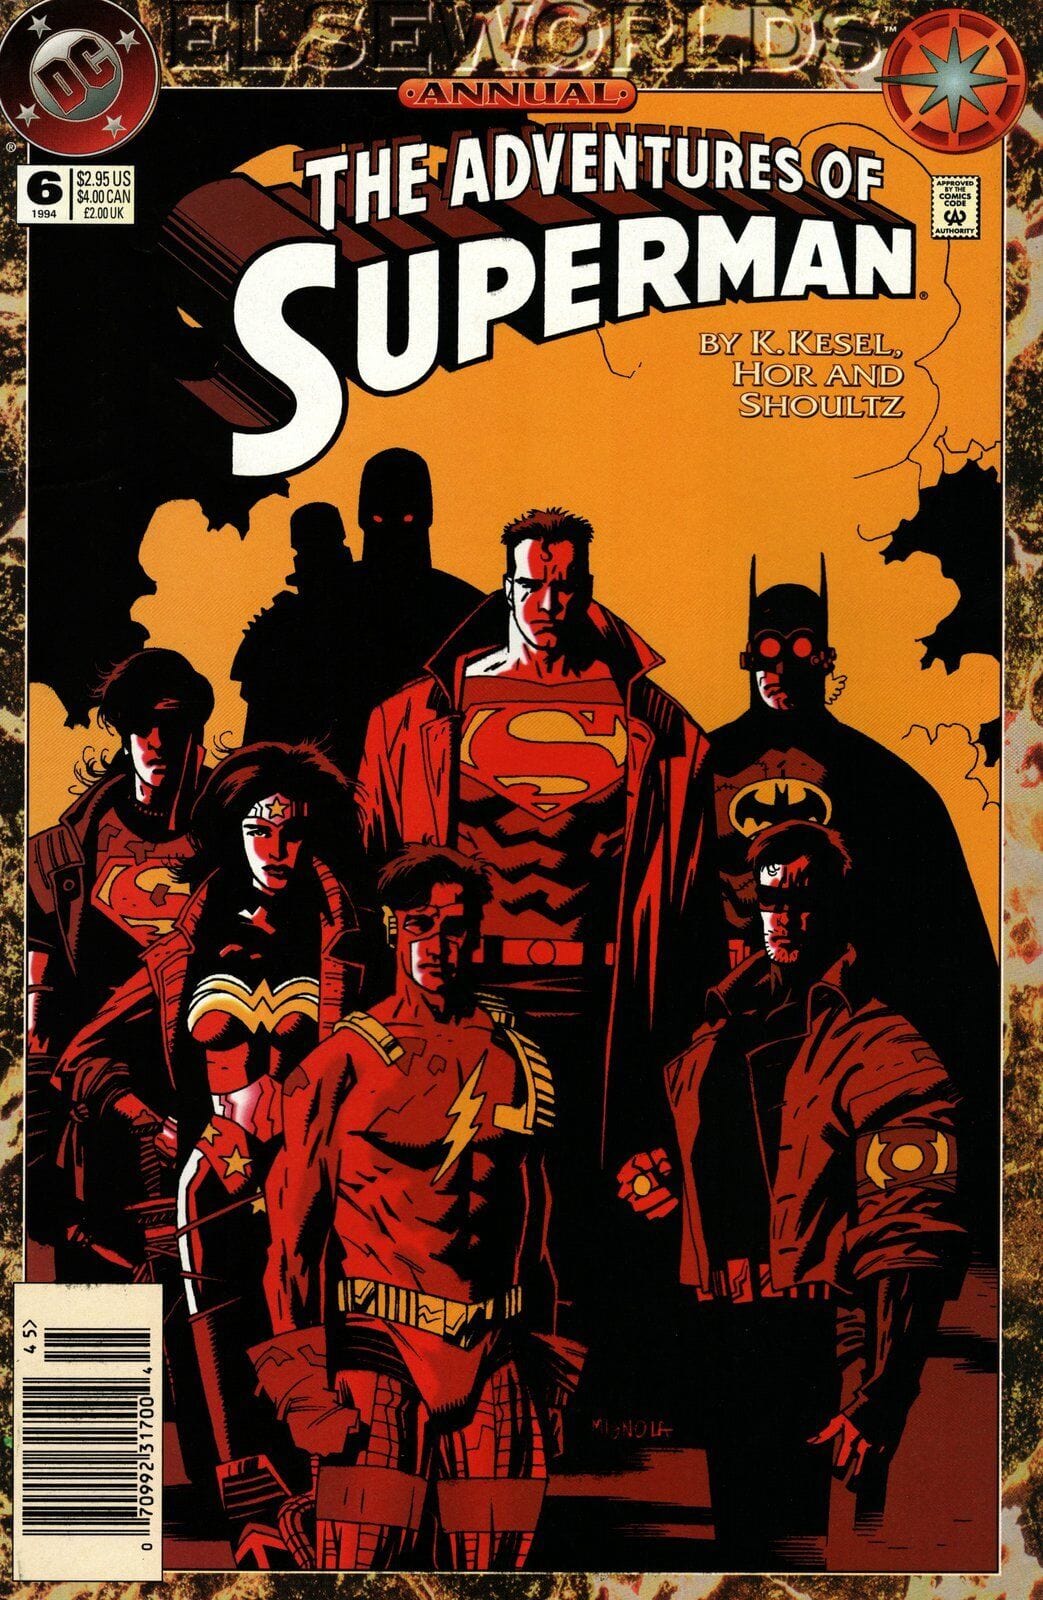 ADVENTURES OF SUPERMAN ANNUAL #6 (ELSEWORLDS)